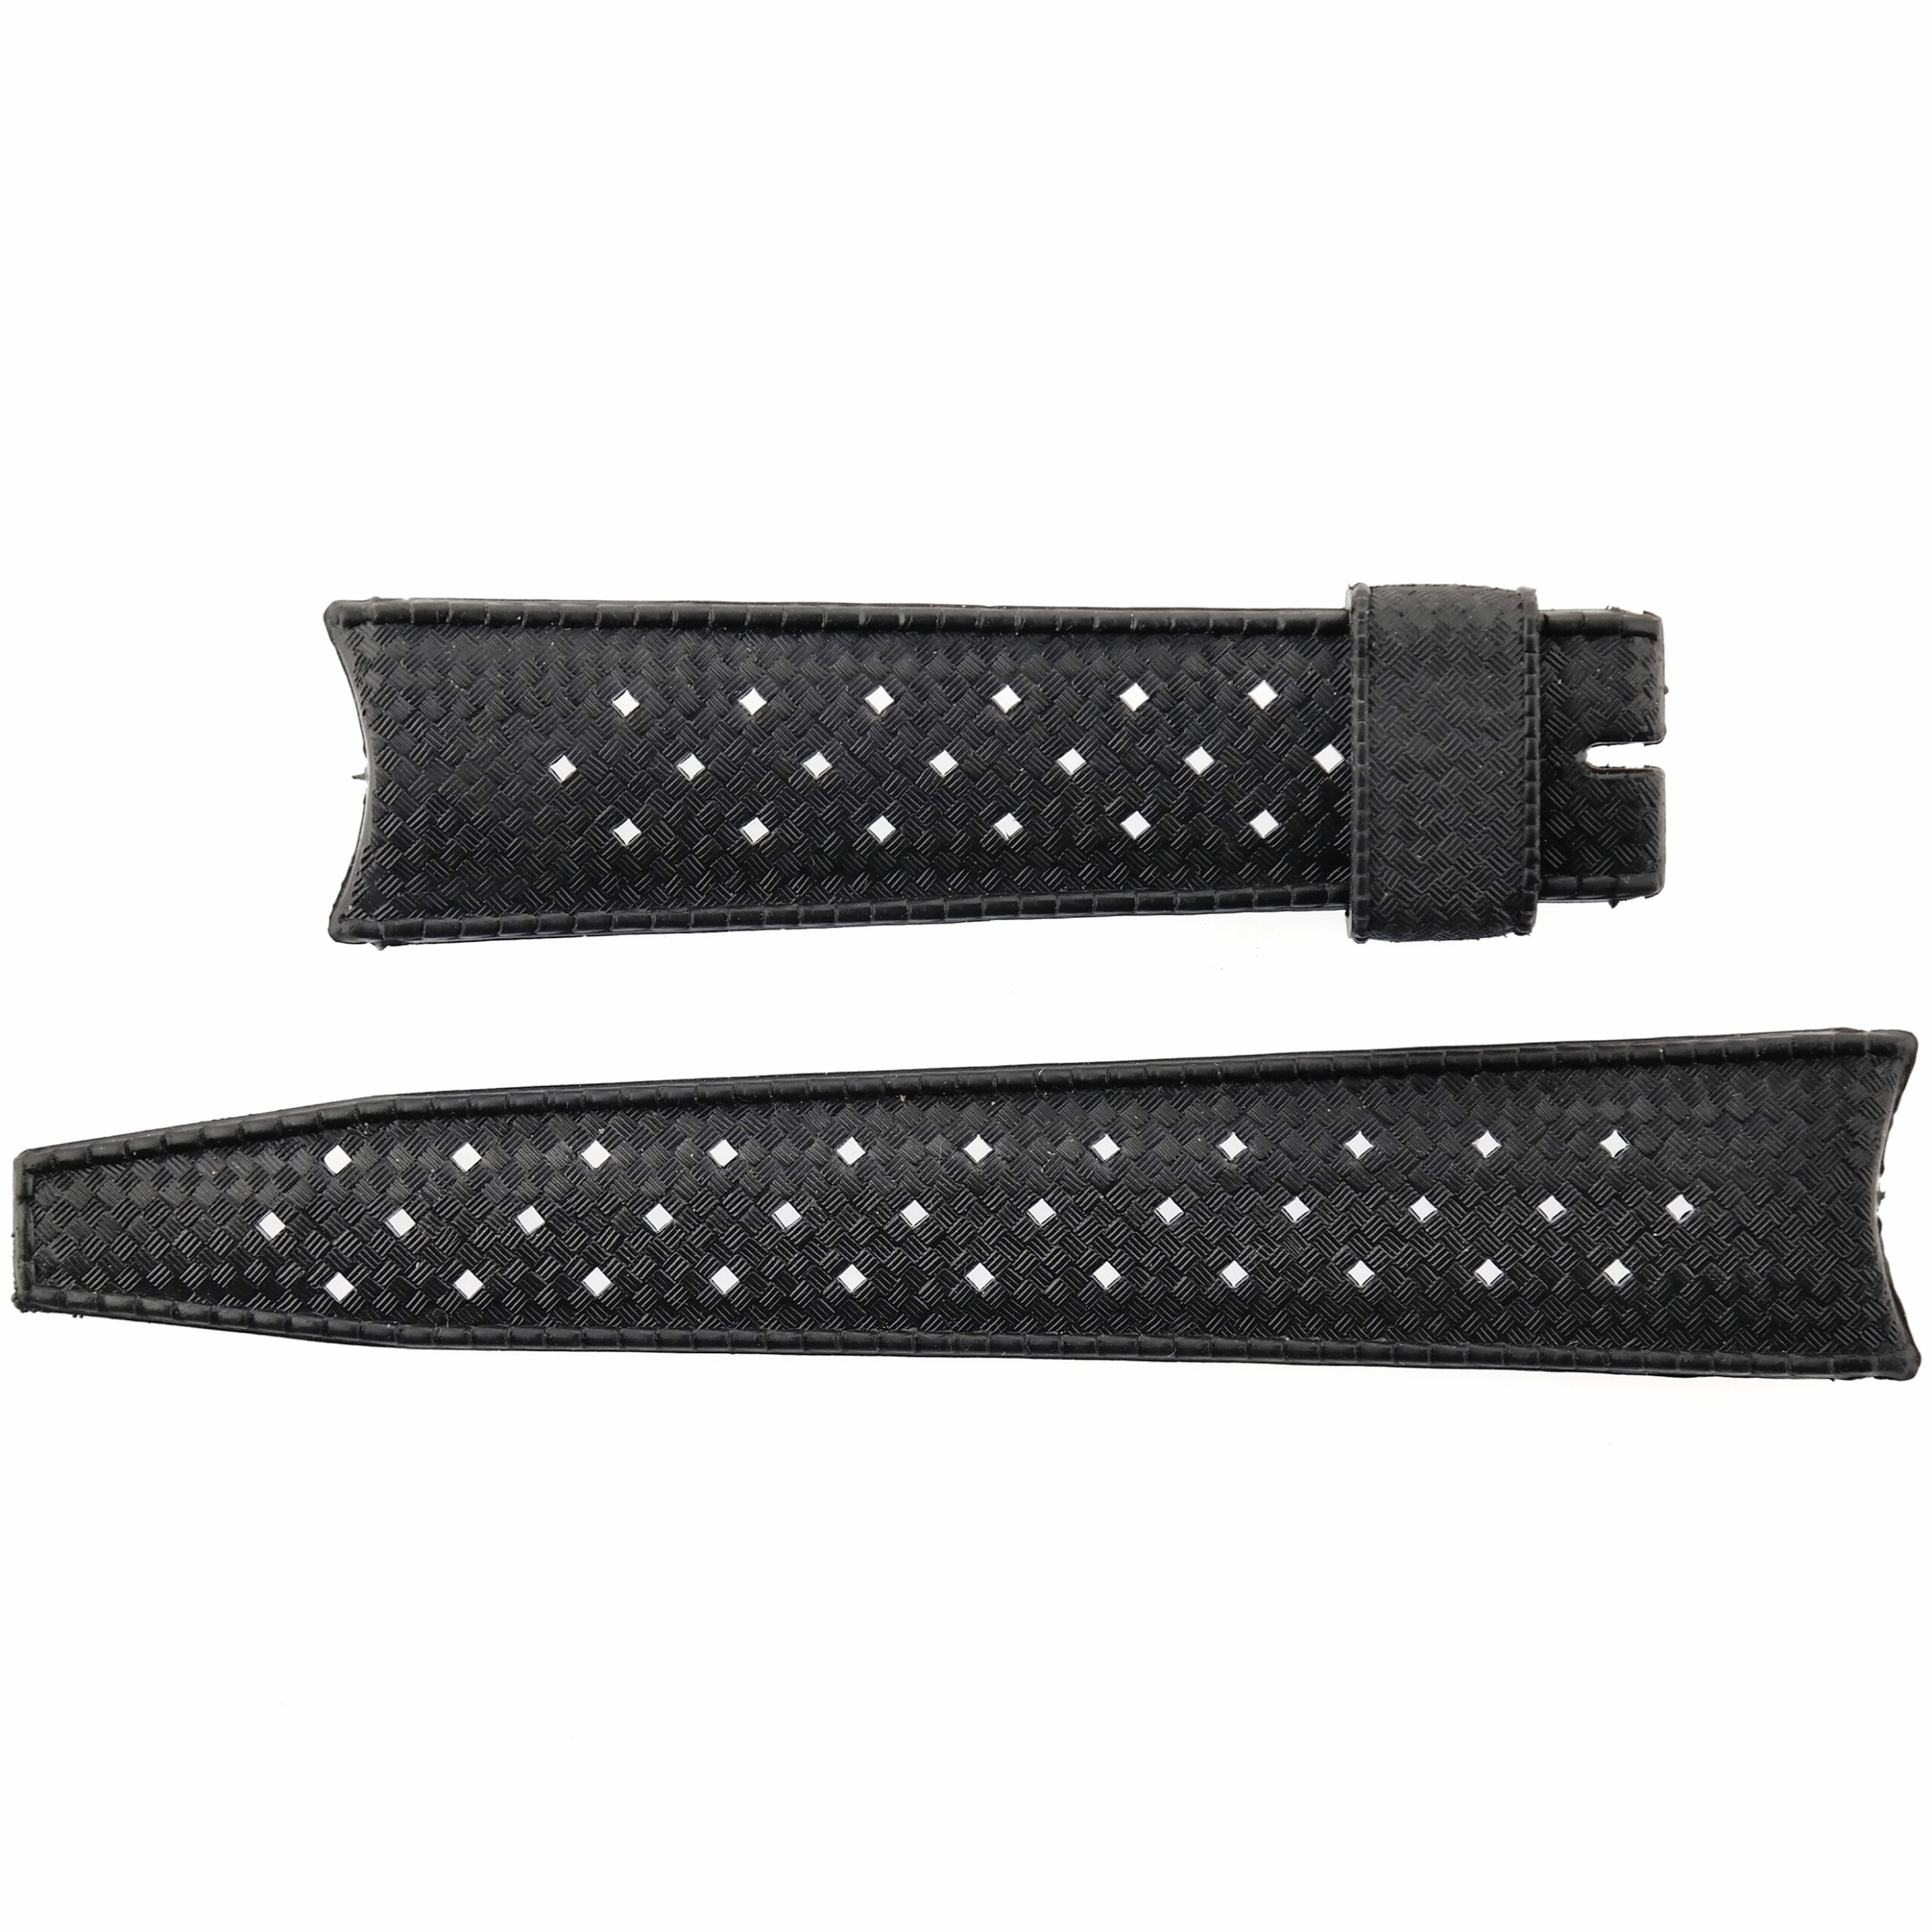 Vintage BESTFIT TROPIC Watch Strap - 22508 - 22 mm - Curved Ends - Swiss Made